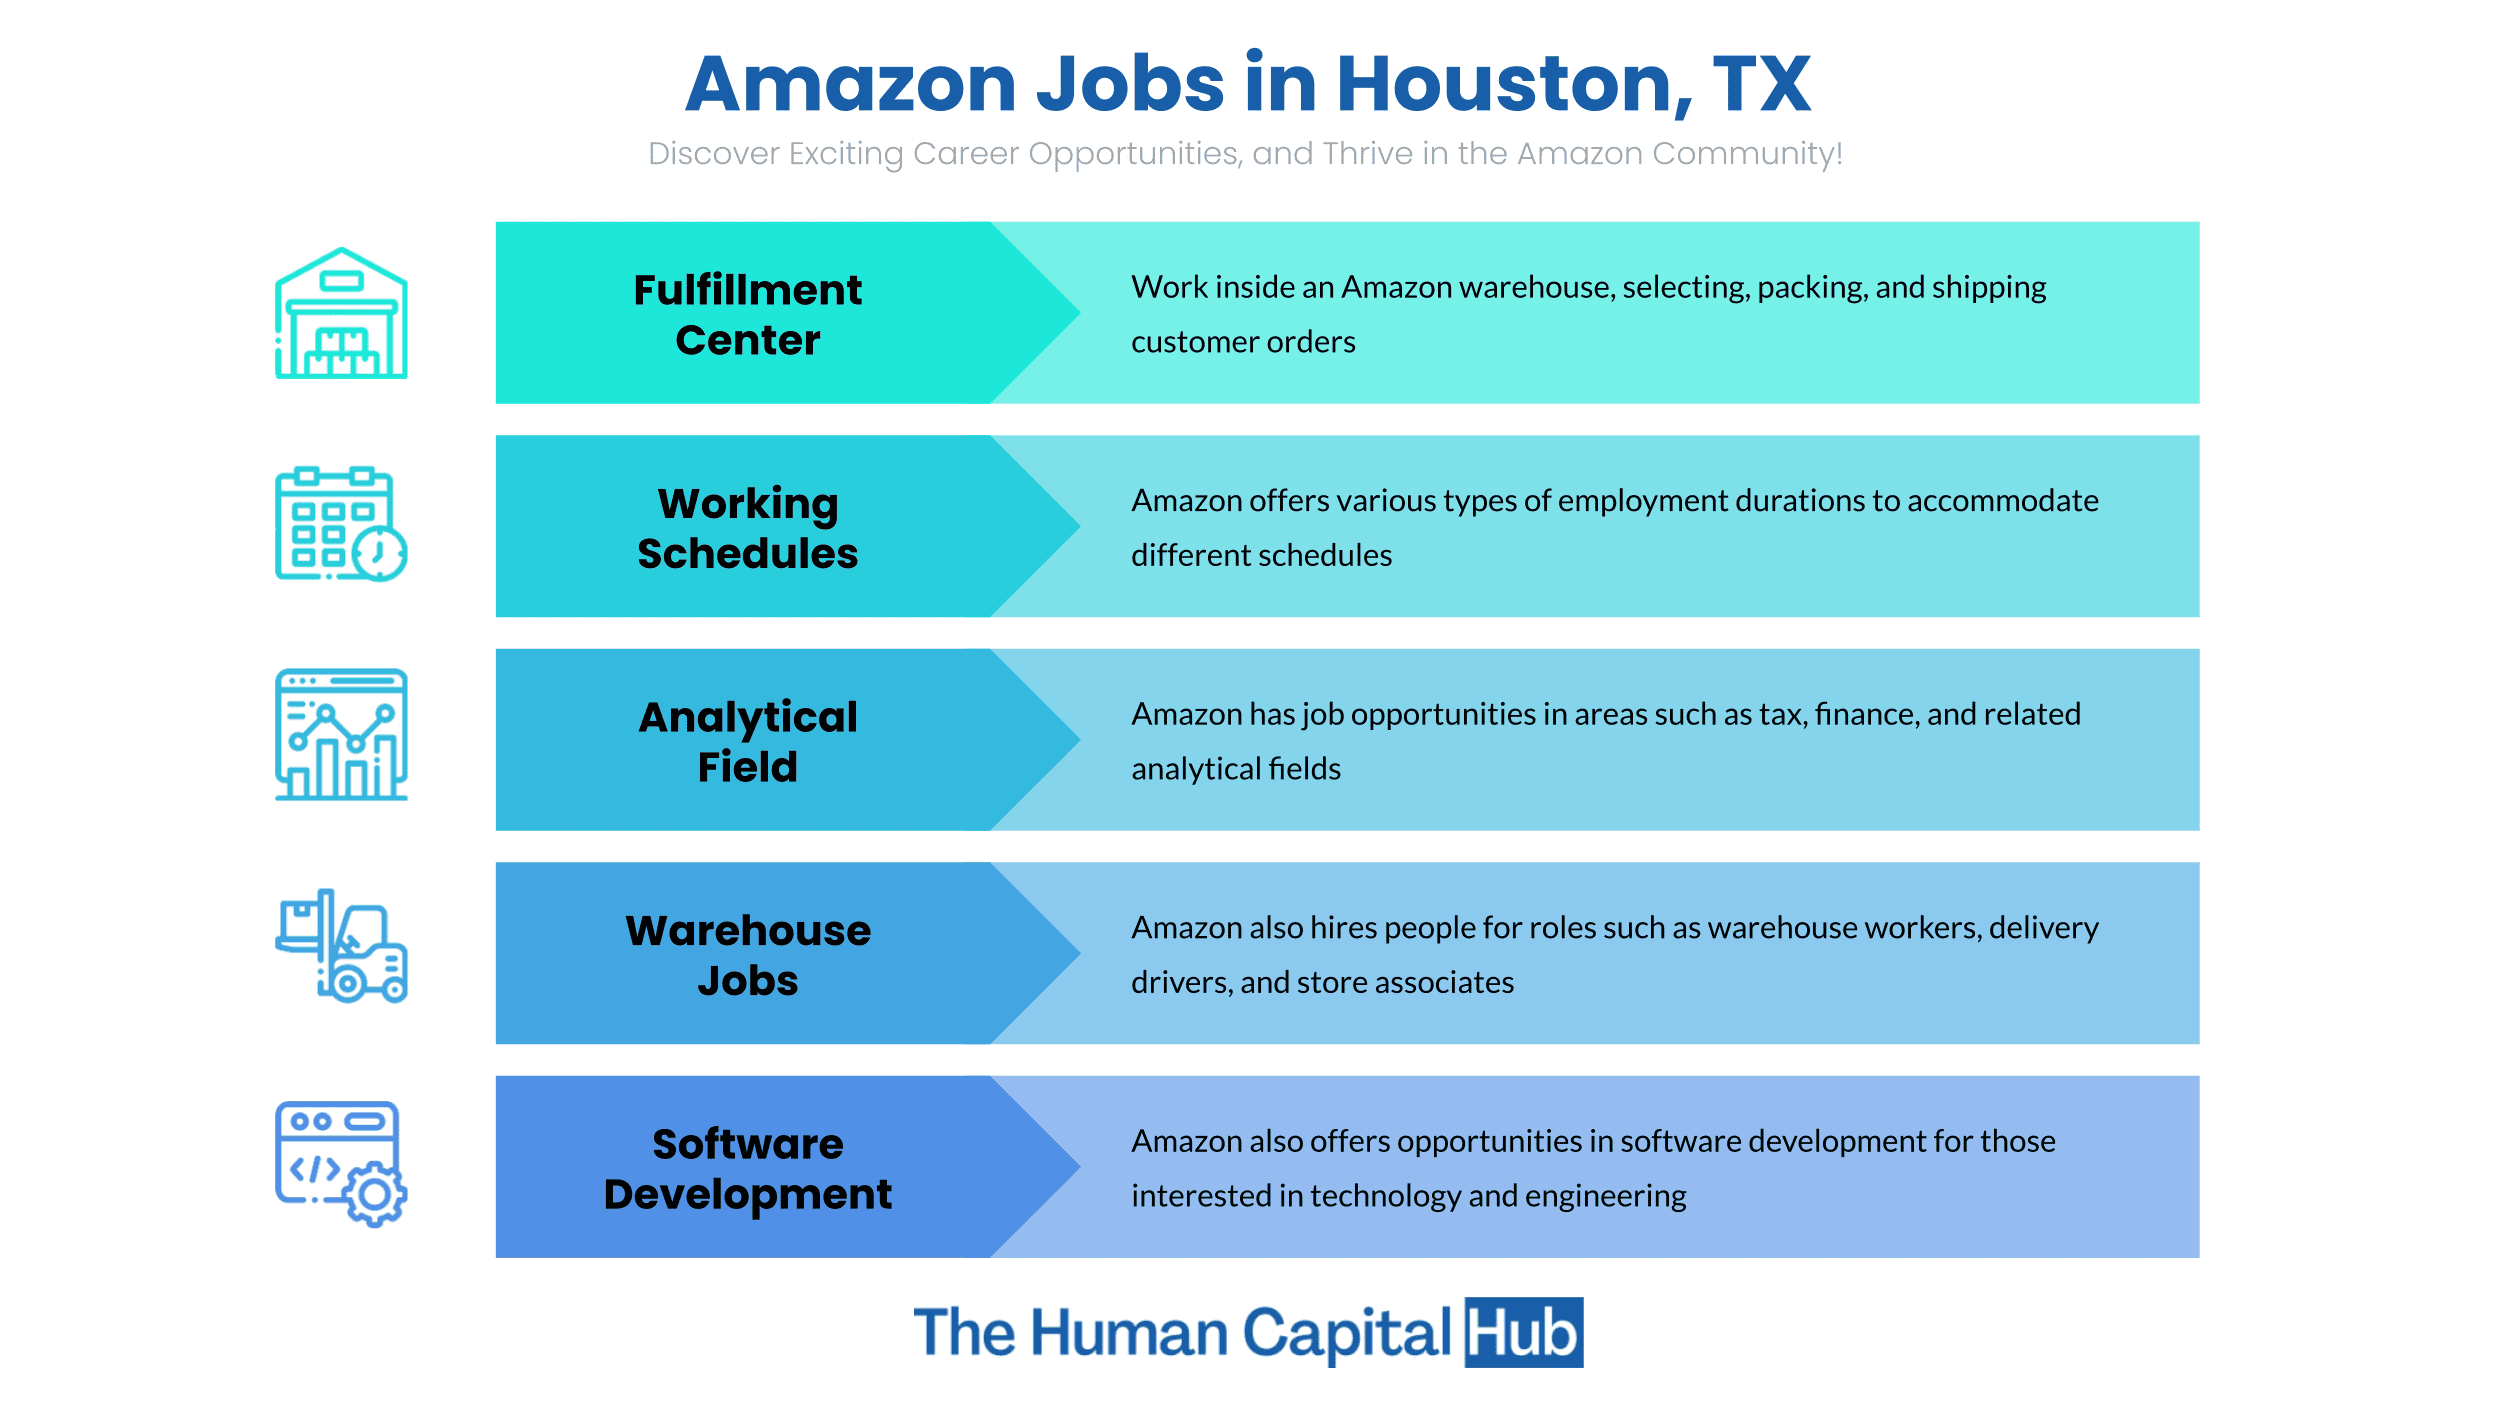 Amazon Jobs in Houston, TX: What you need to know